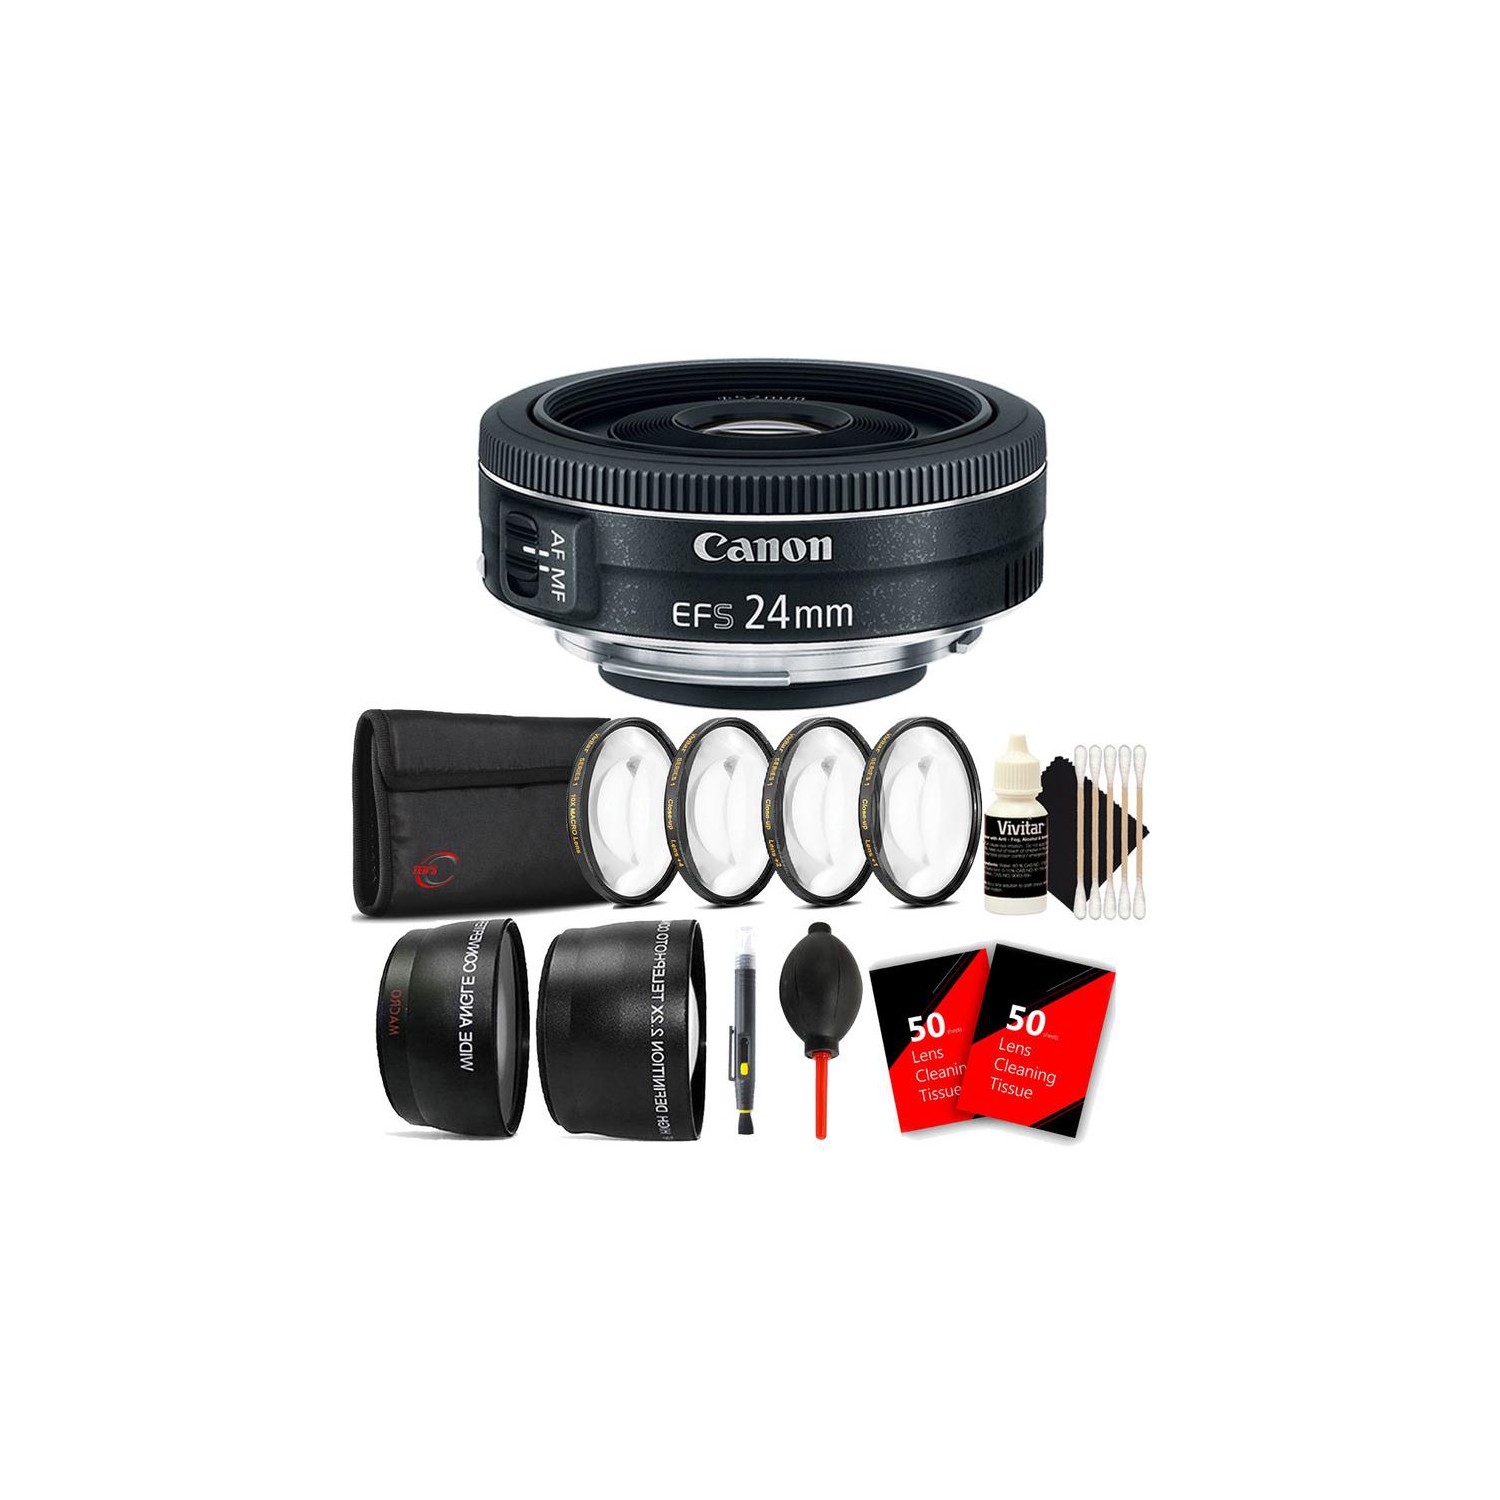 Canon EF-S 24mm f/2.8 STM Lens with Accessory Bundle For Canon 80D, 77D and 70D International Version w/Seller Warranty